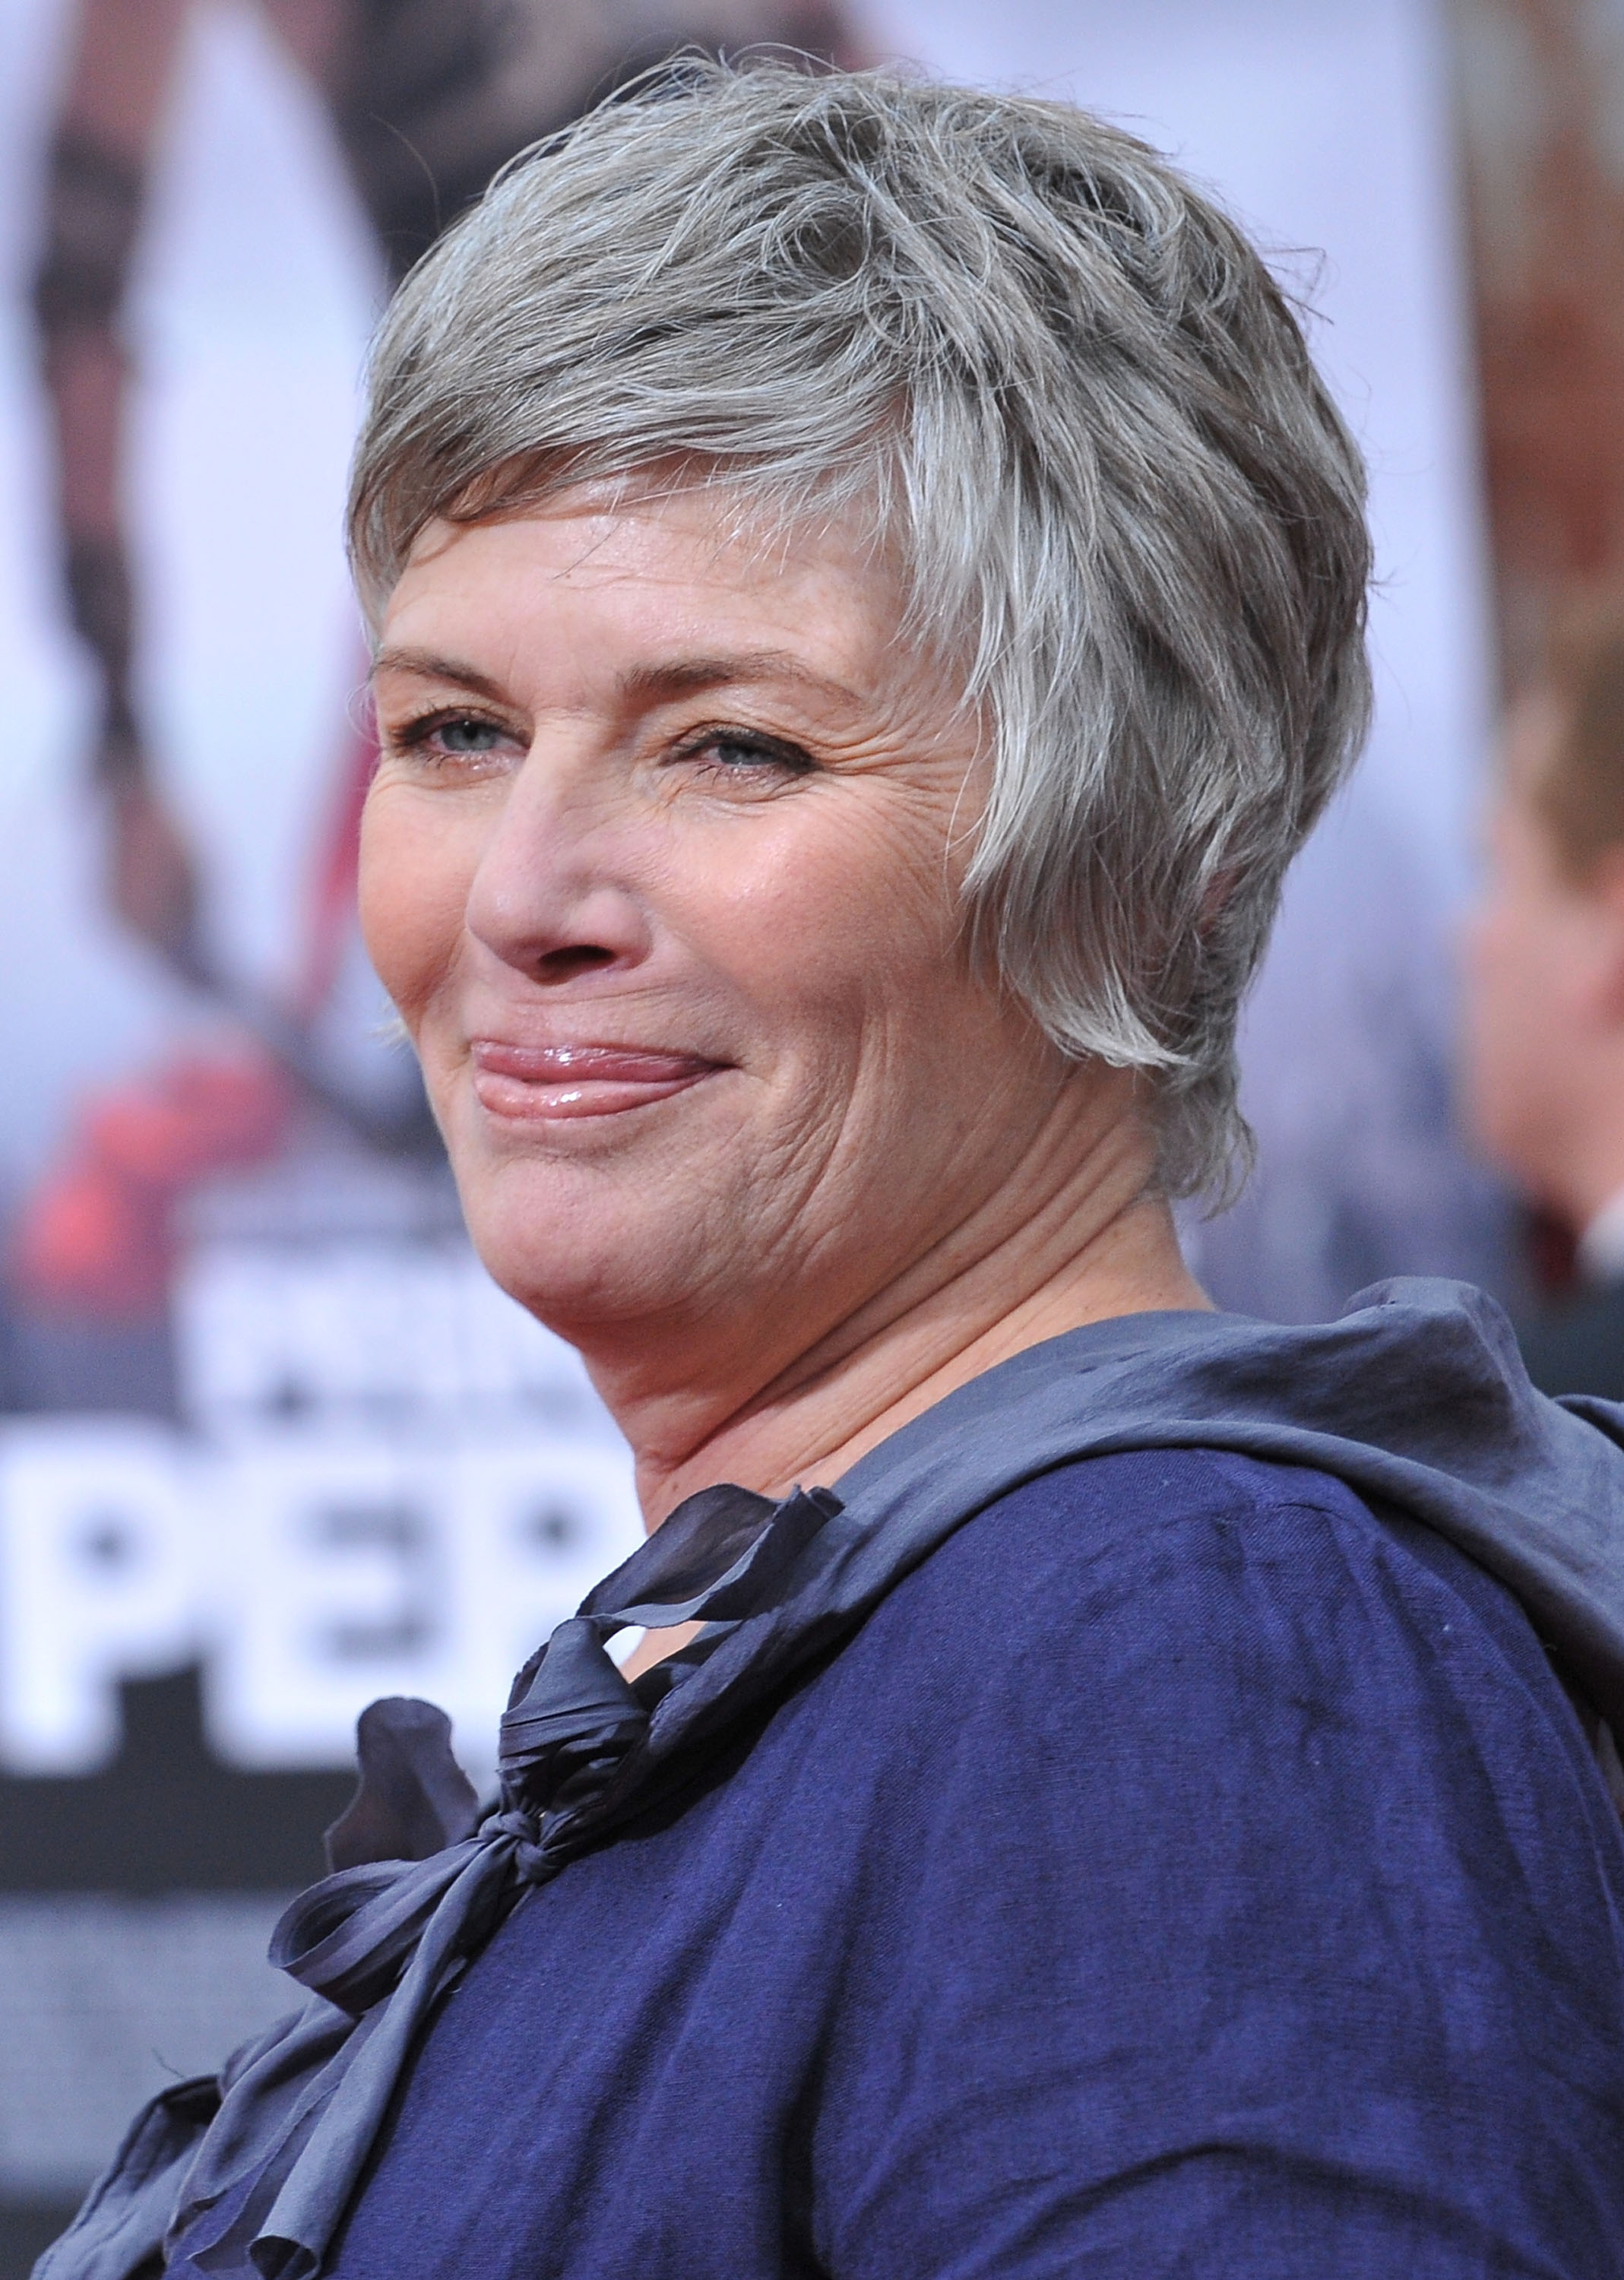 Kelly McGillis in Hollywood, California on May 17, 2010 | Source: Getty Images